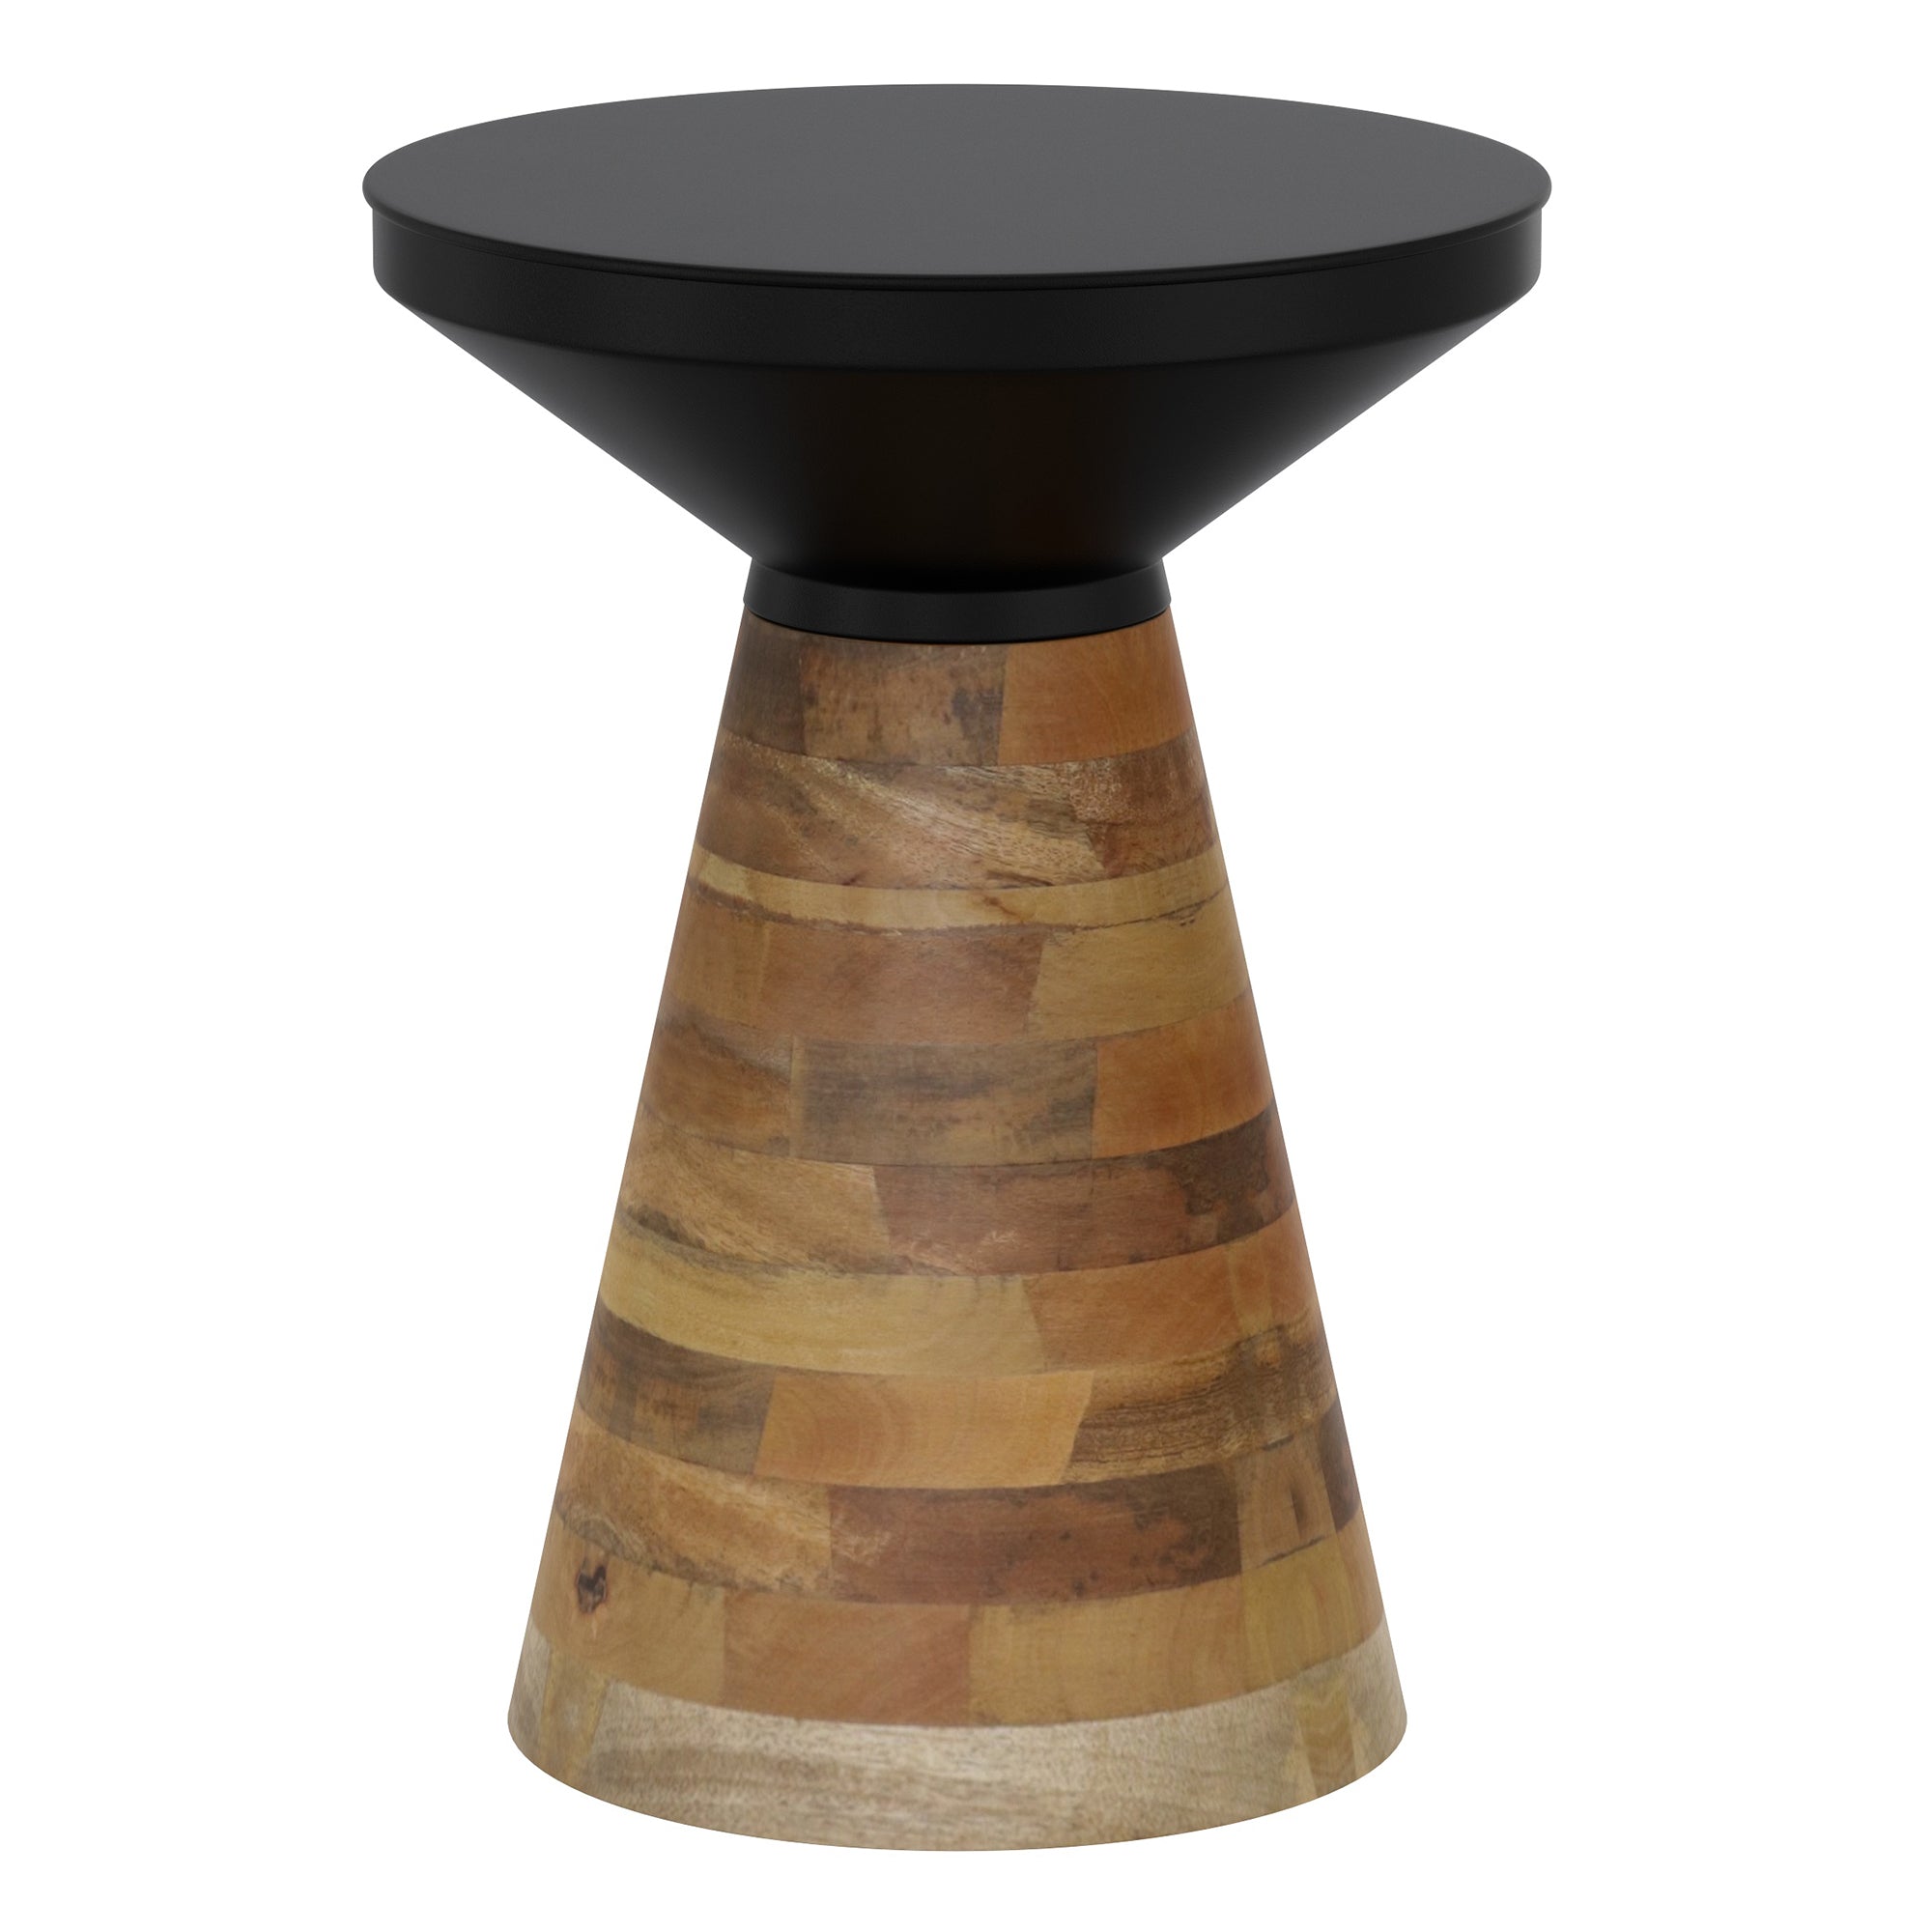 BODEN-ACCENT TABLE-BLACK